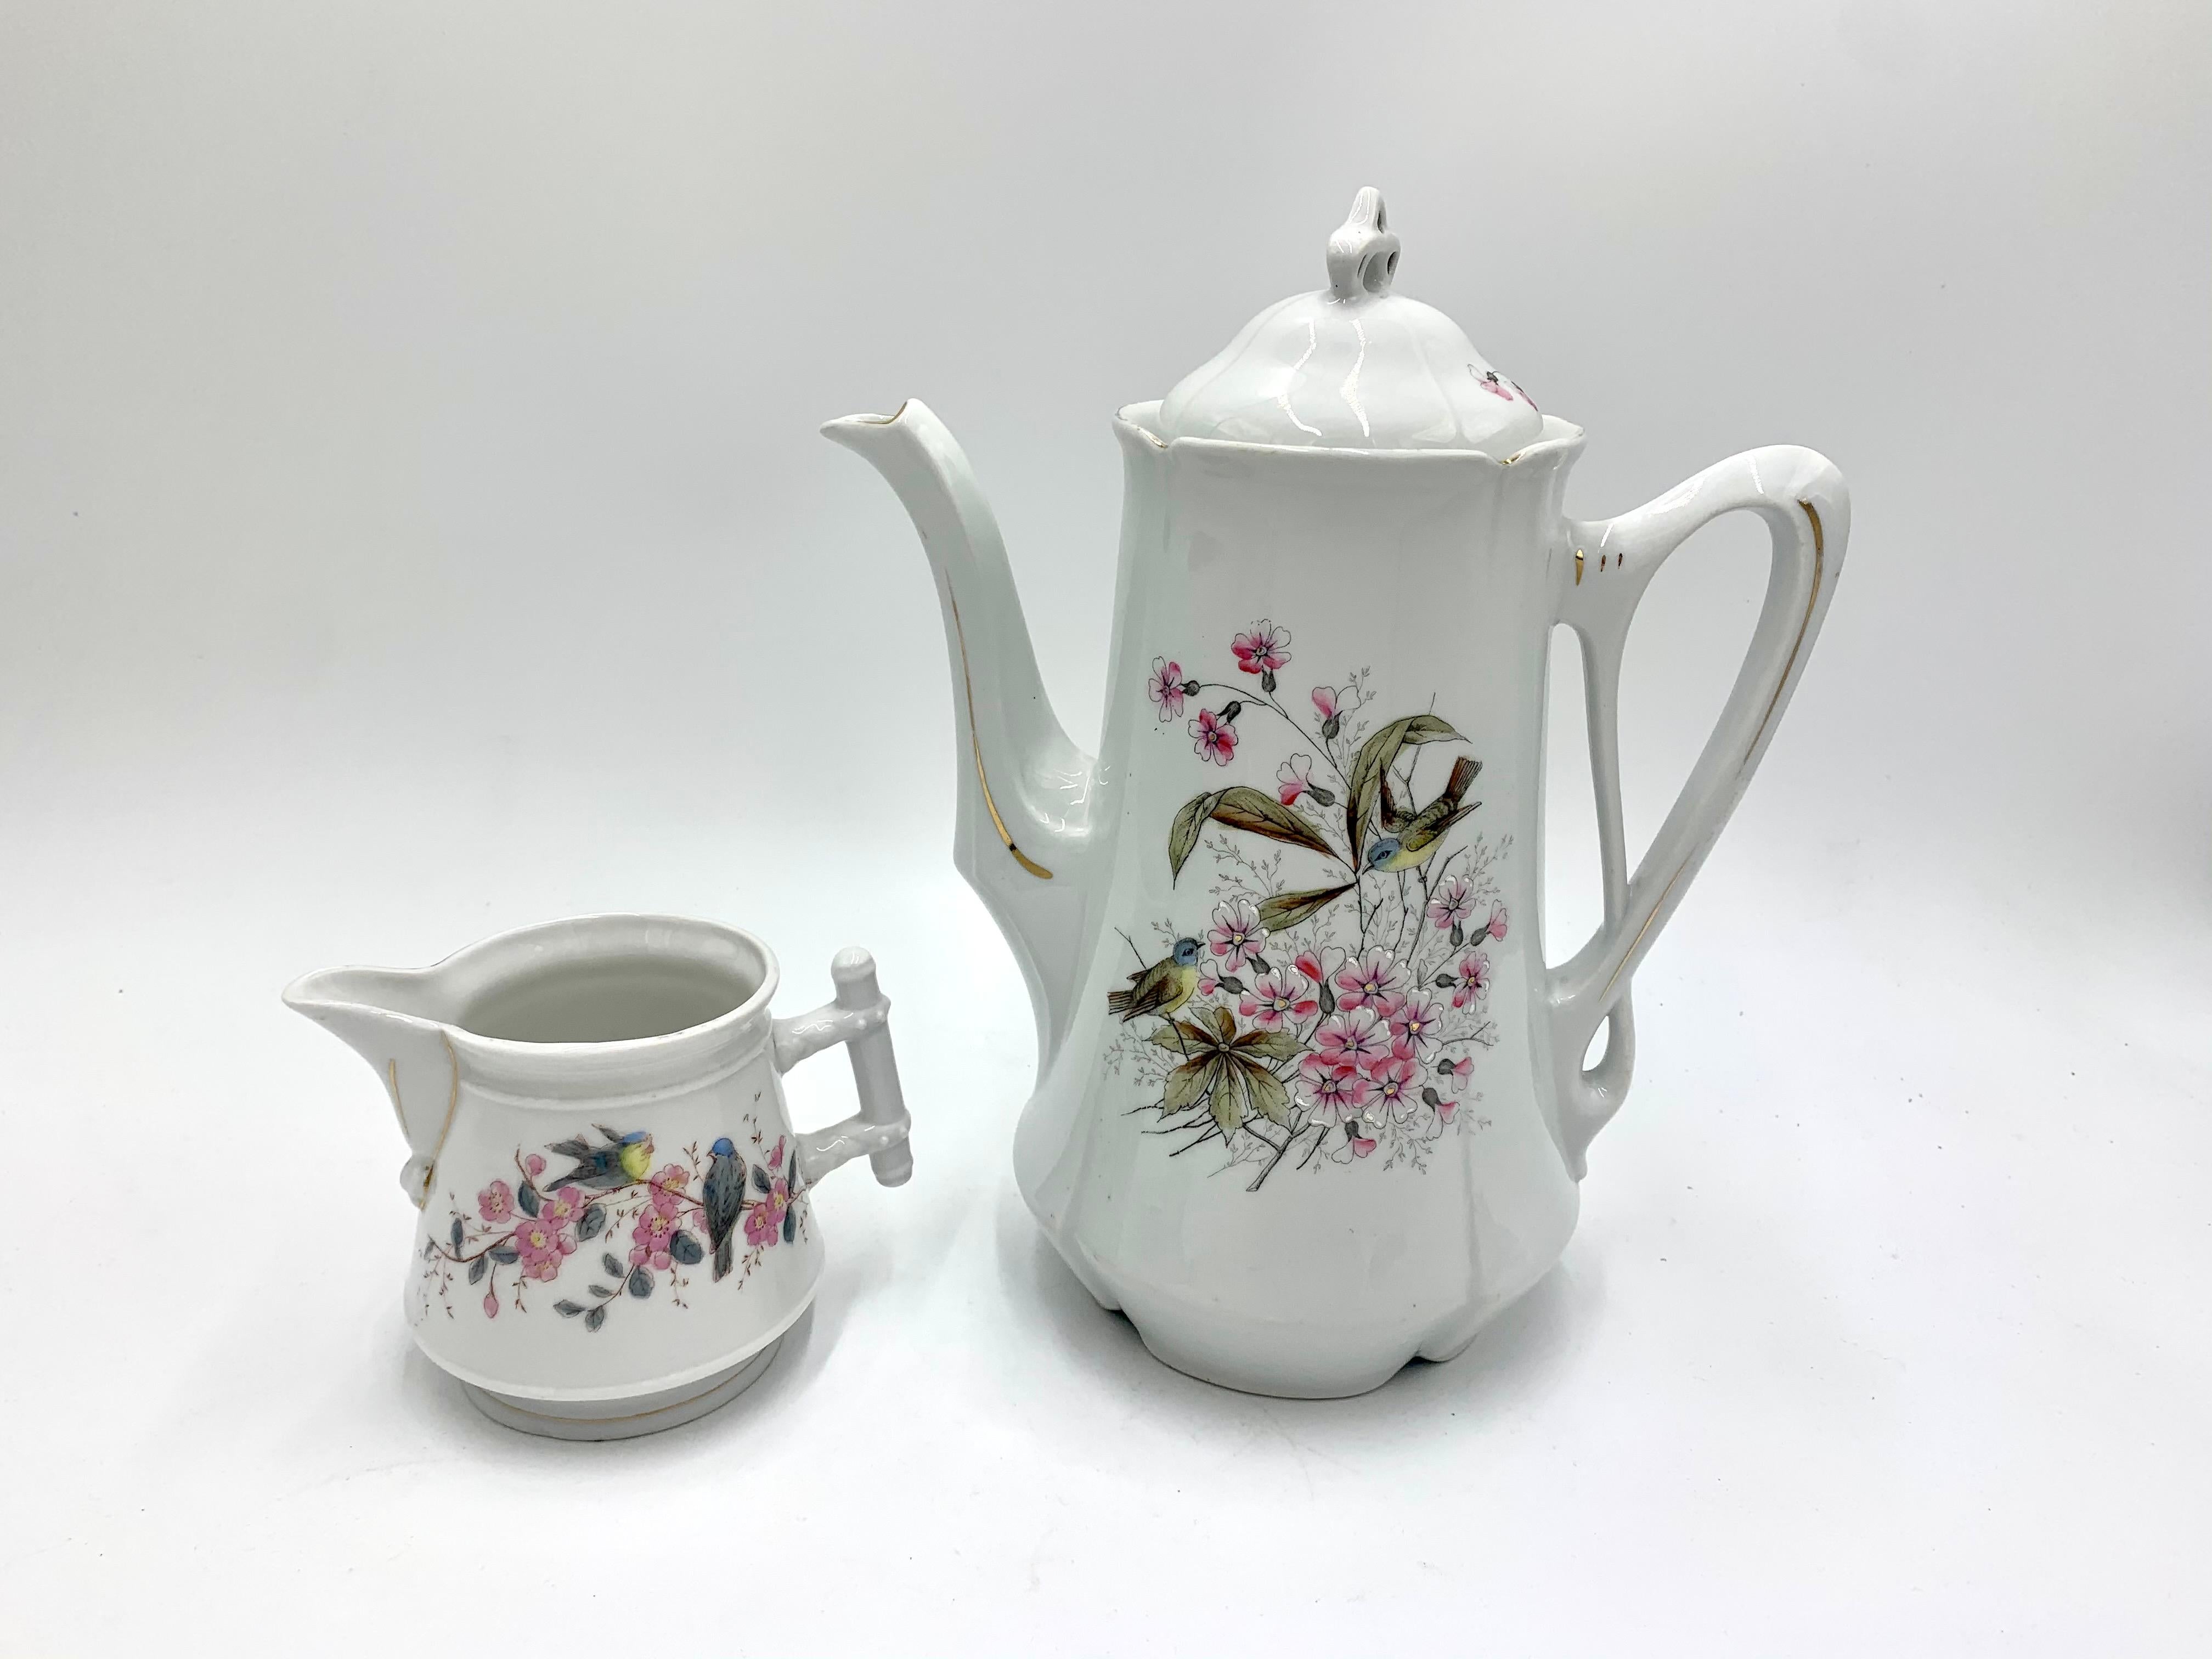 A large porcelain jug with a milk jug.

Hand-decorated, painted titmouse and pink flowers.

Very good condition.

Signed C.T. Tielsch

Measures: Jug: Height 28cm, width 25cm

Milk jug: Height 11 cm, width 13 cm.